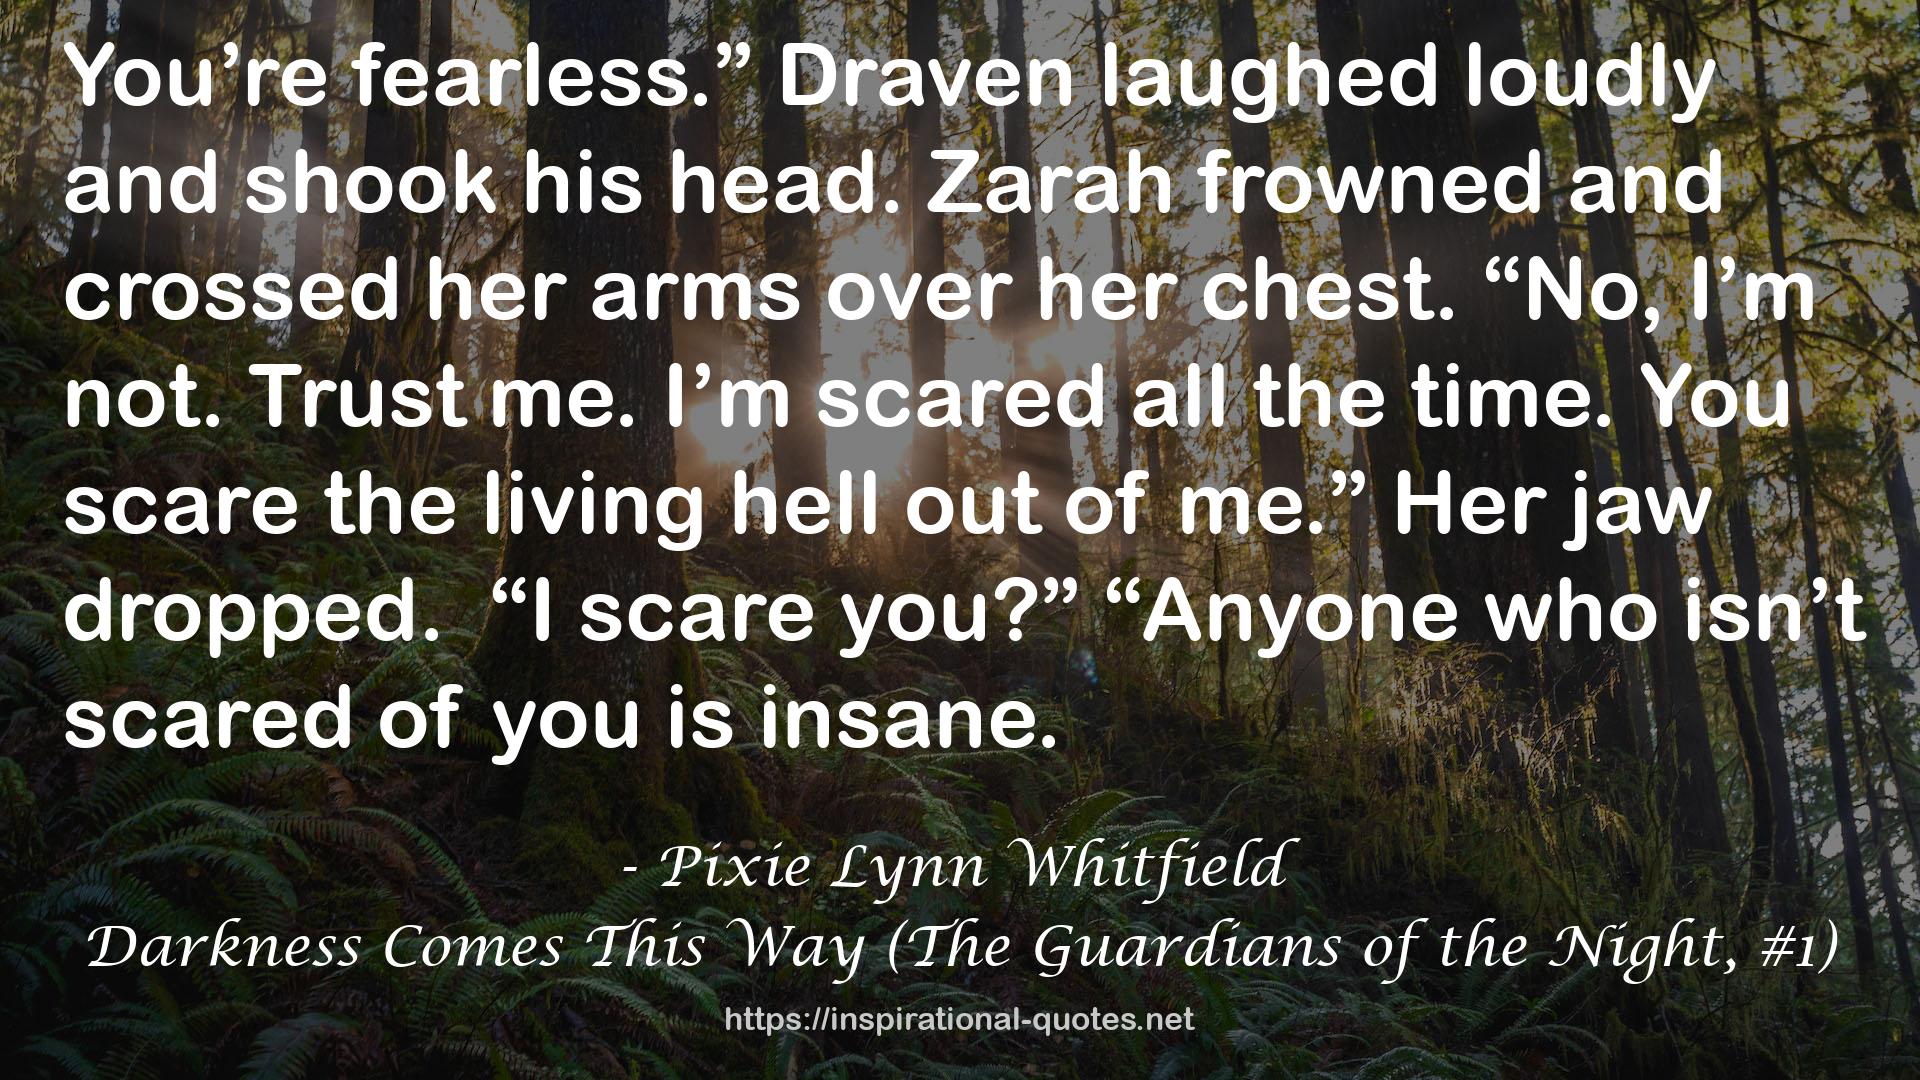 Darkness Comes This Way (The Guardians of the Night, #1) QUOTES